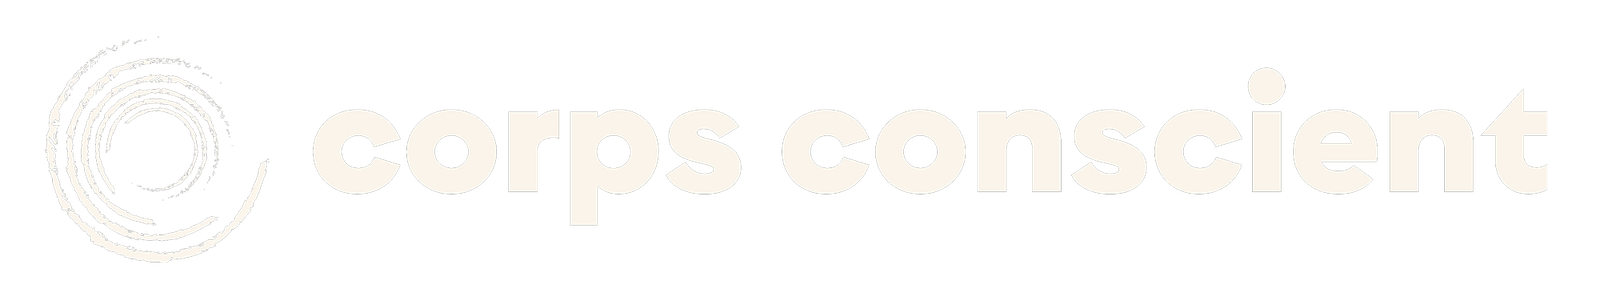 logo-corps-conscient-footer